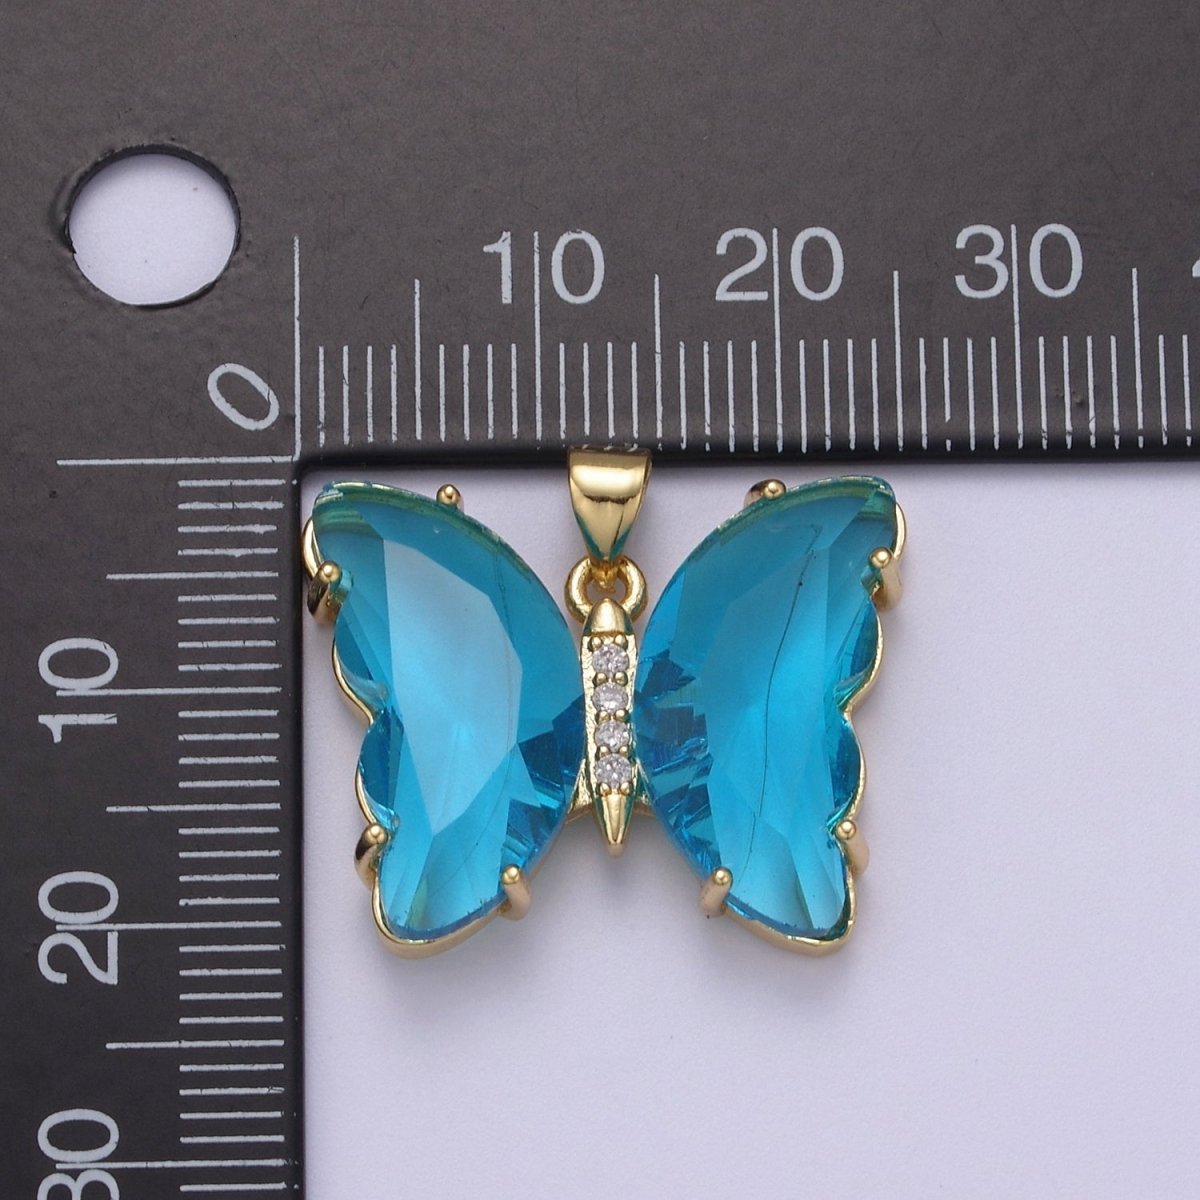 Dainty Mariposa Butterfly Charm Butterfly Charm Glass Pendant for Necklace Earring Bracelet Component in 14k Gold Filled Tarnish Free H-844 H-845 H-847 H-861 - DLUXCA